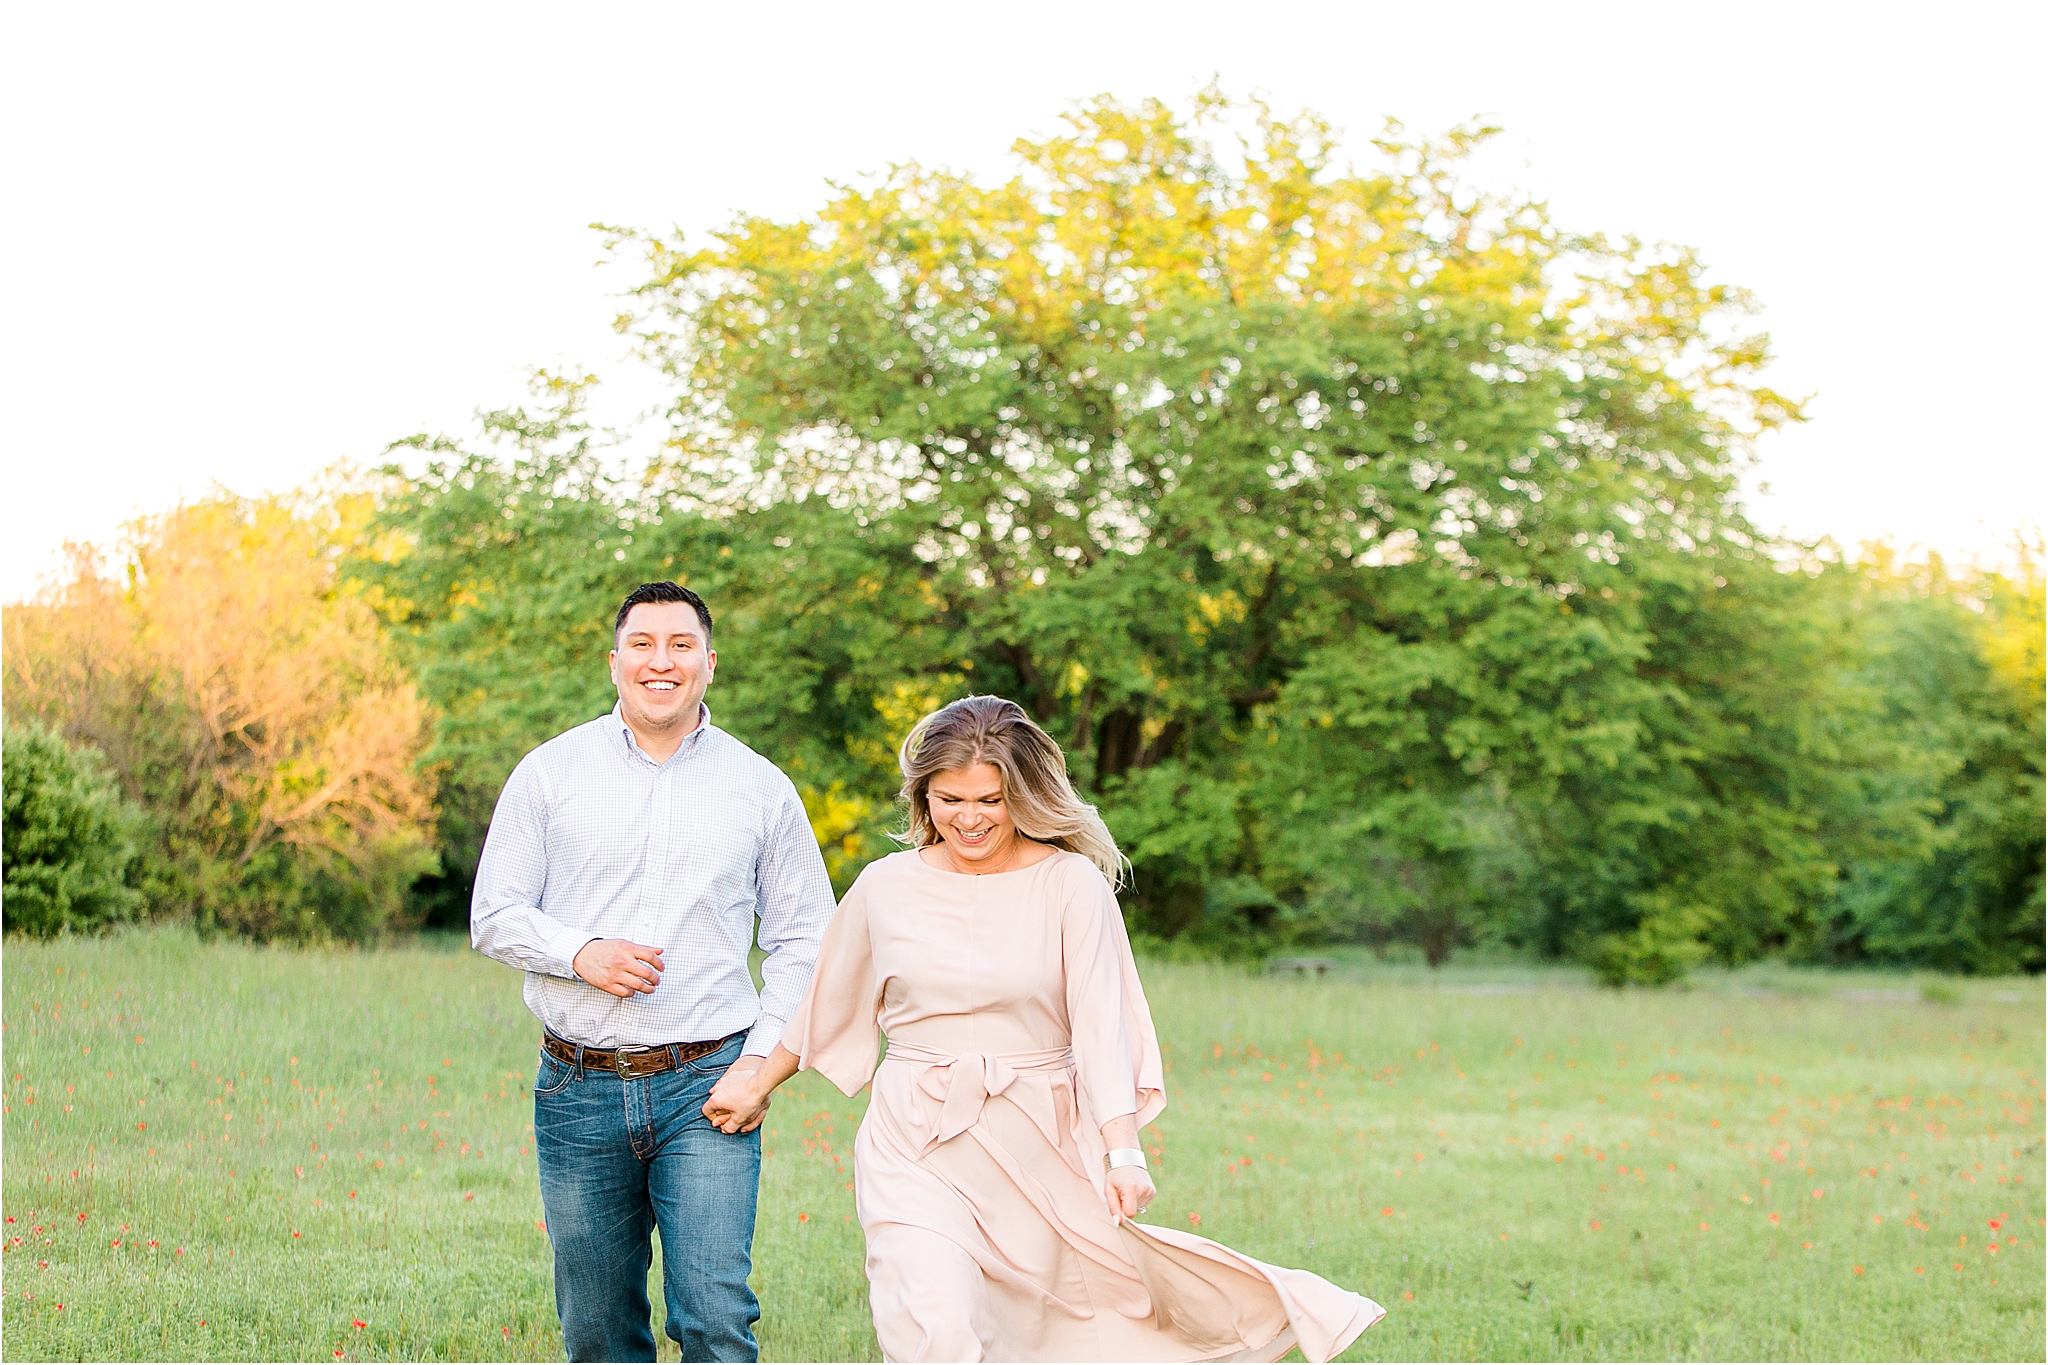 An engaged couple Running through a lush field with trees while laughing during an engagement session in Fort Worth, Texas 